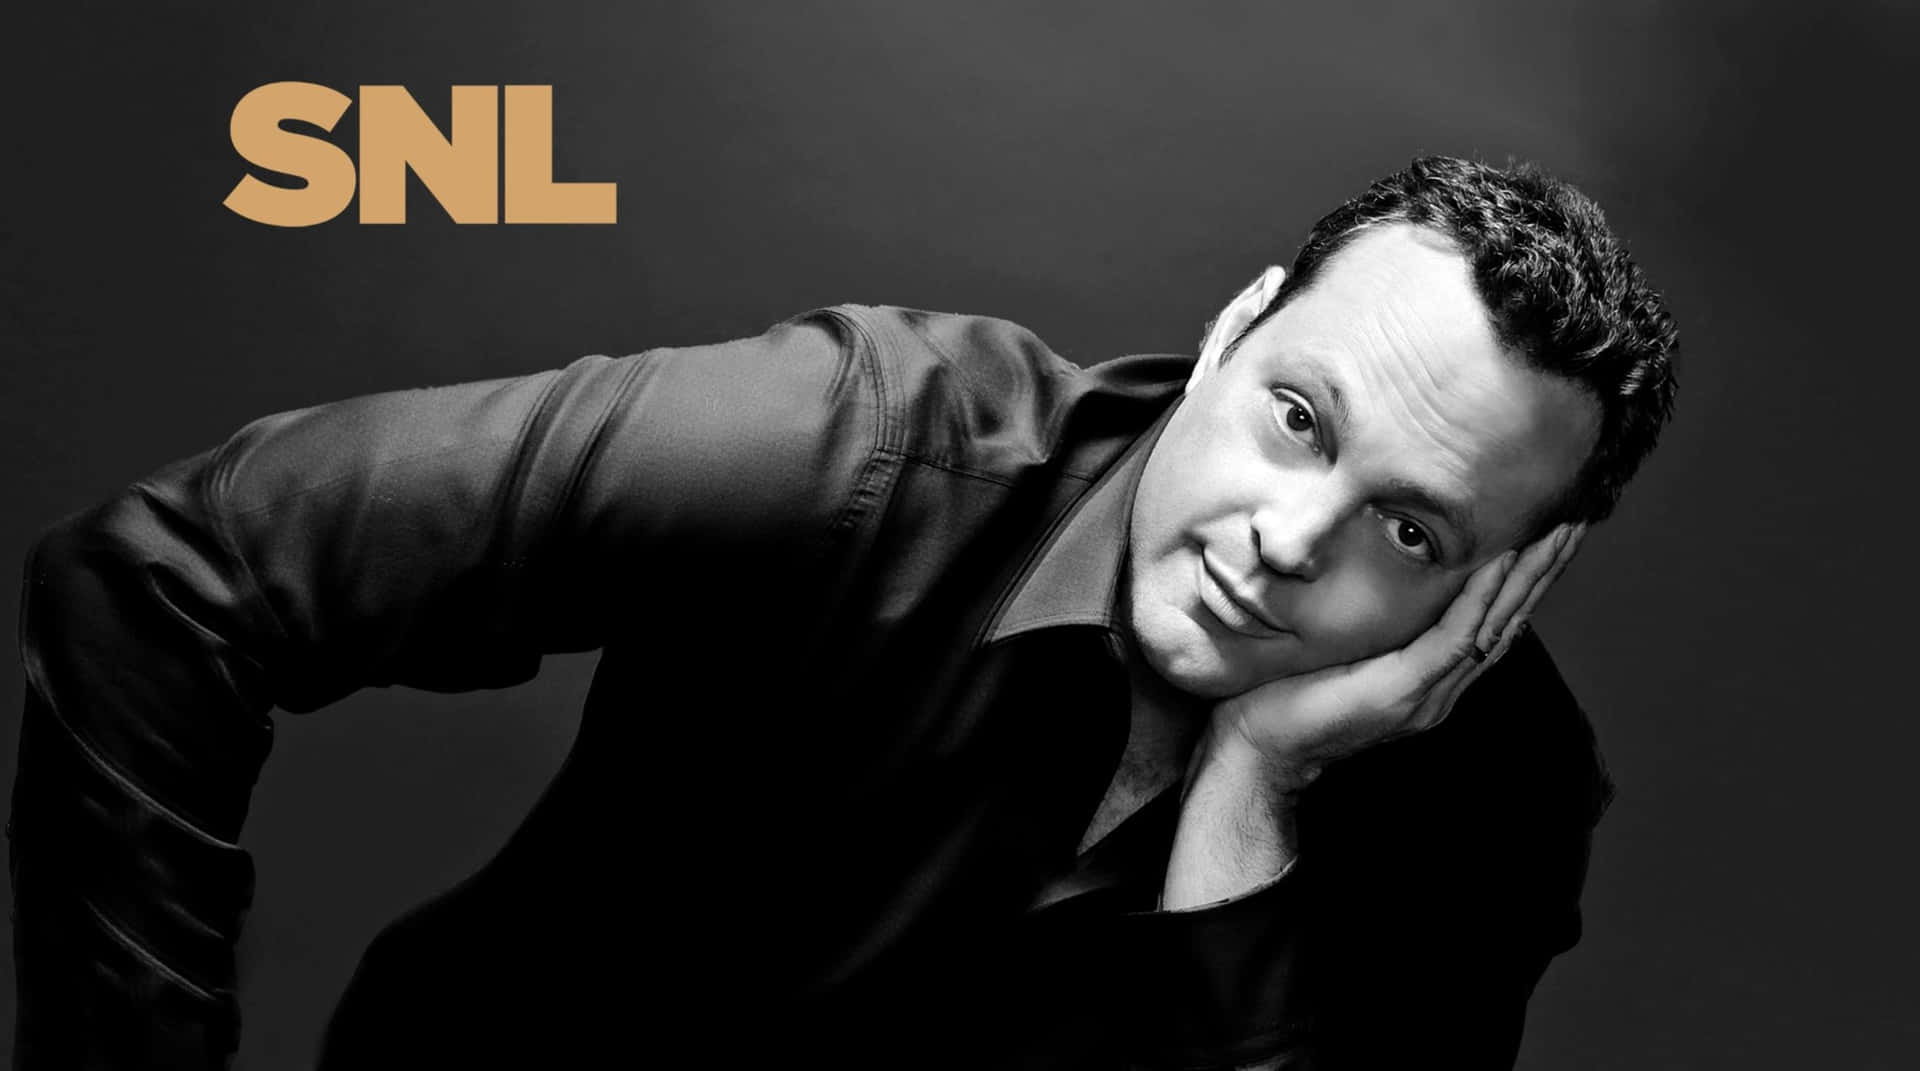 Vince Vaughn in a candid moment Wallpaper